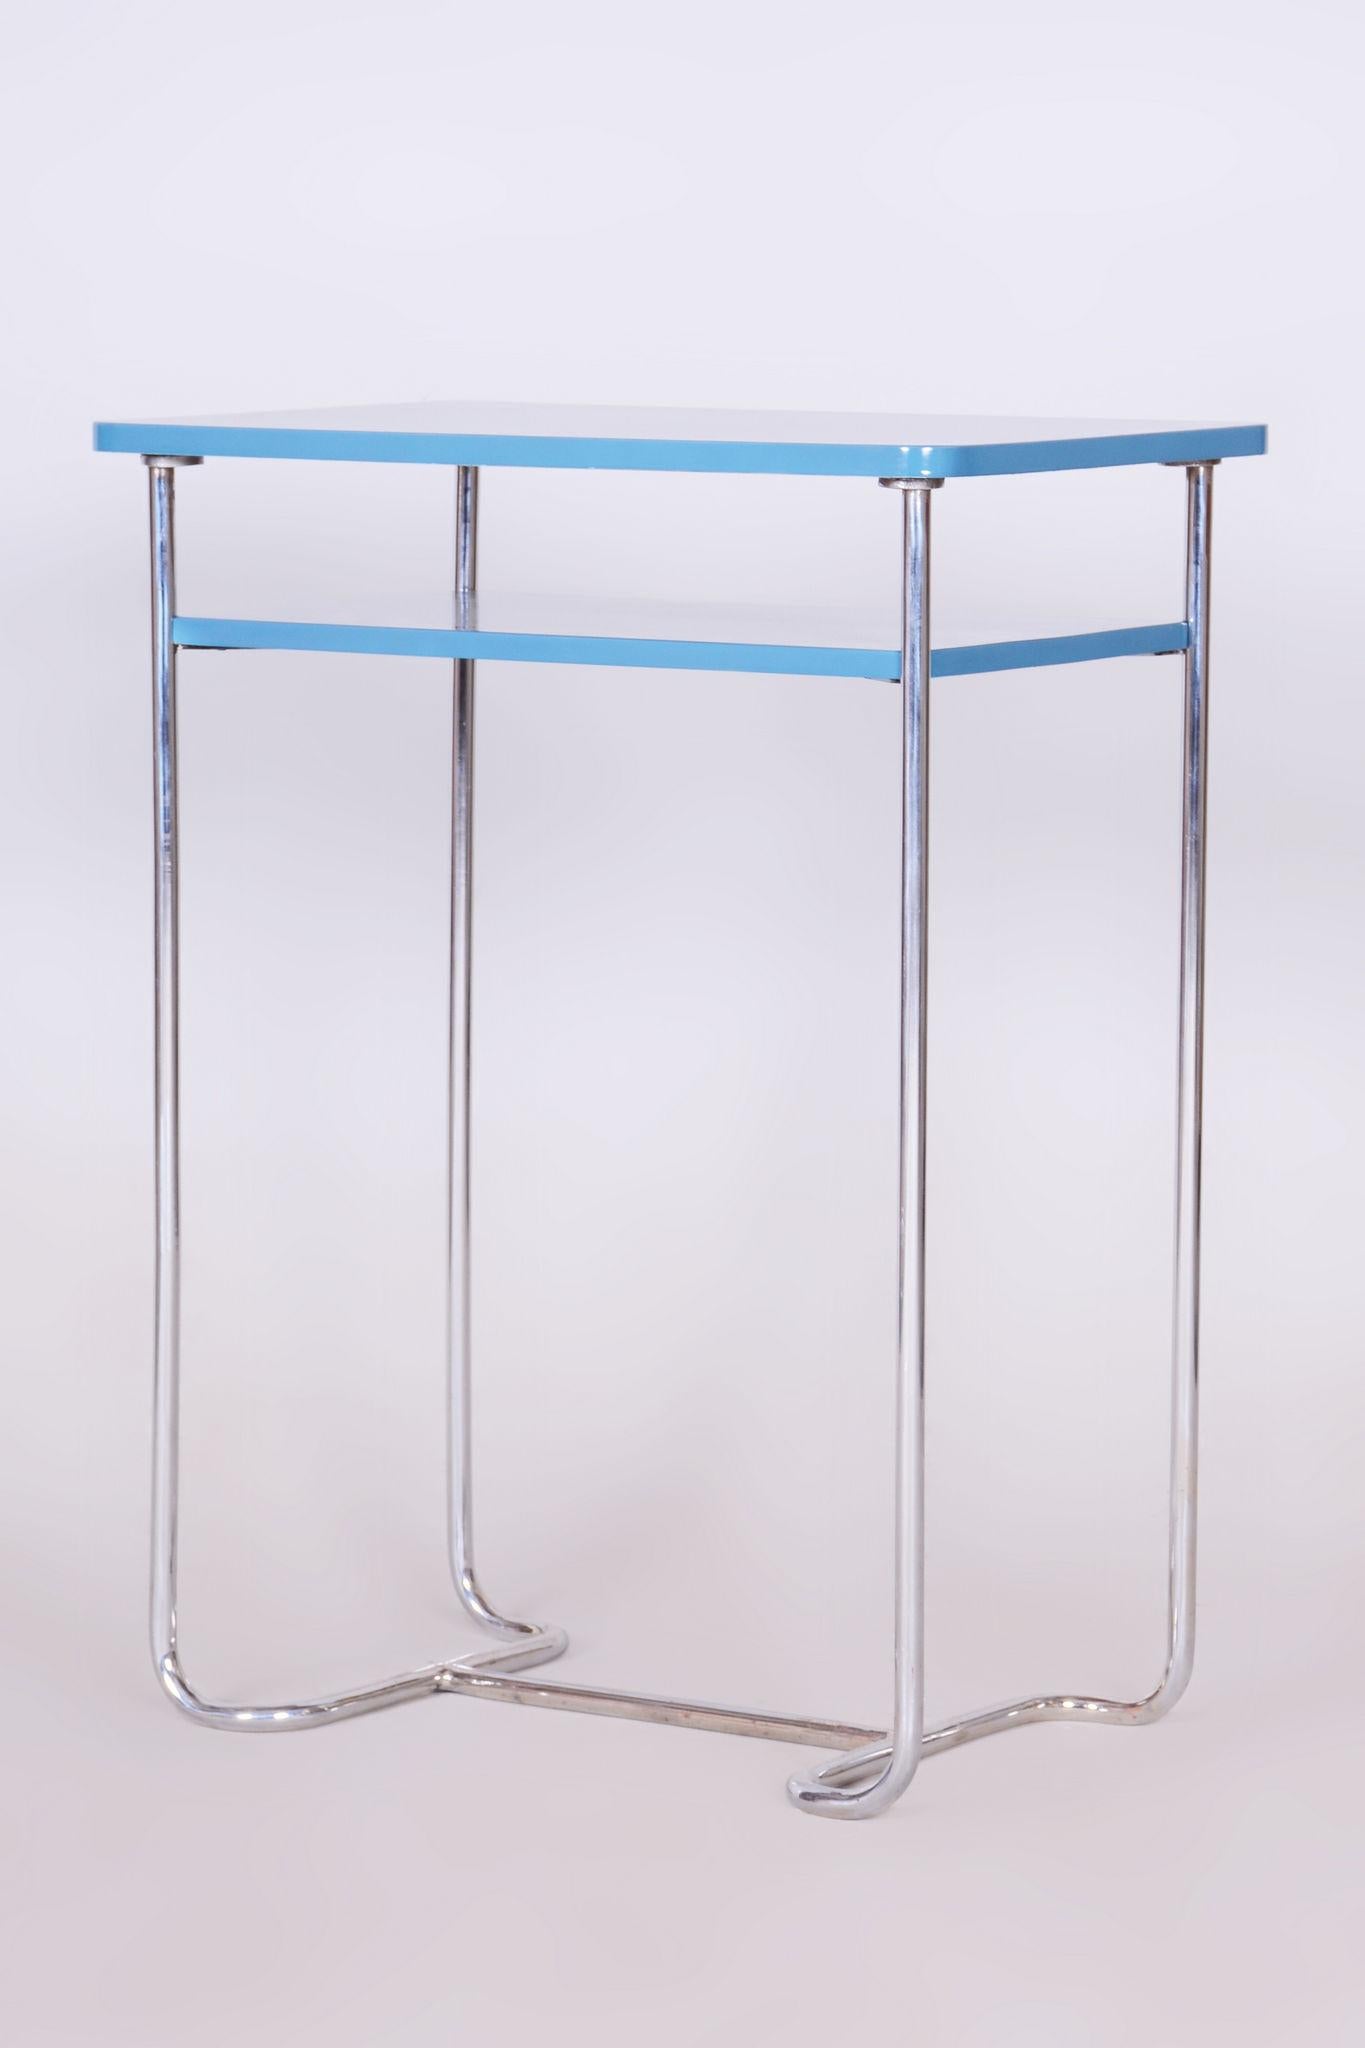 Restored Blue Side Table, by Mücke-Melder, Chrome-Plated Steel, Czech, 1930s In Good Condition For Sale In Horomerice, CZ